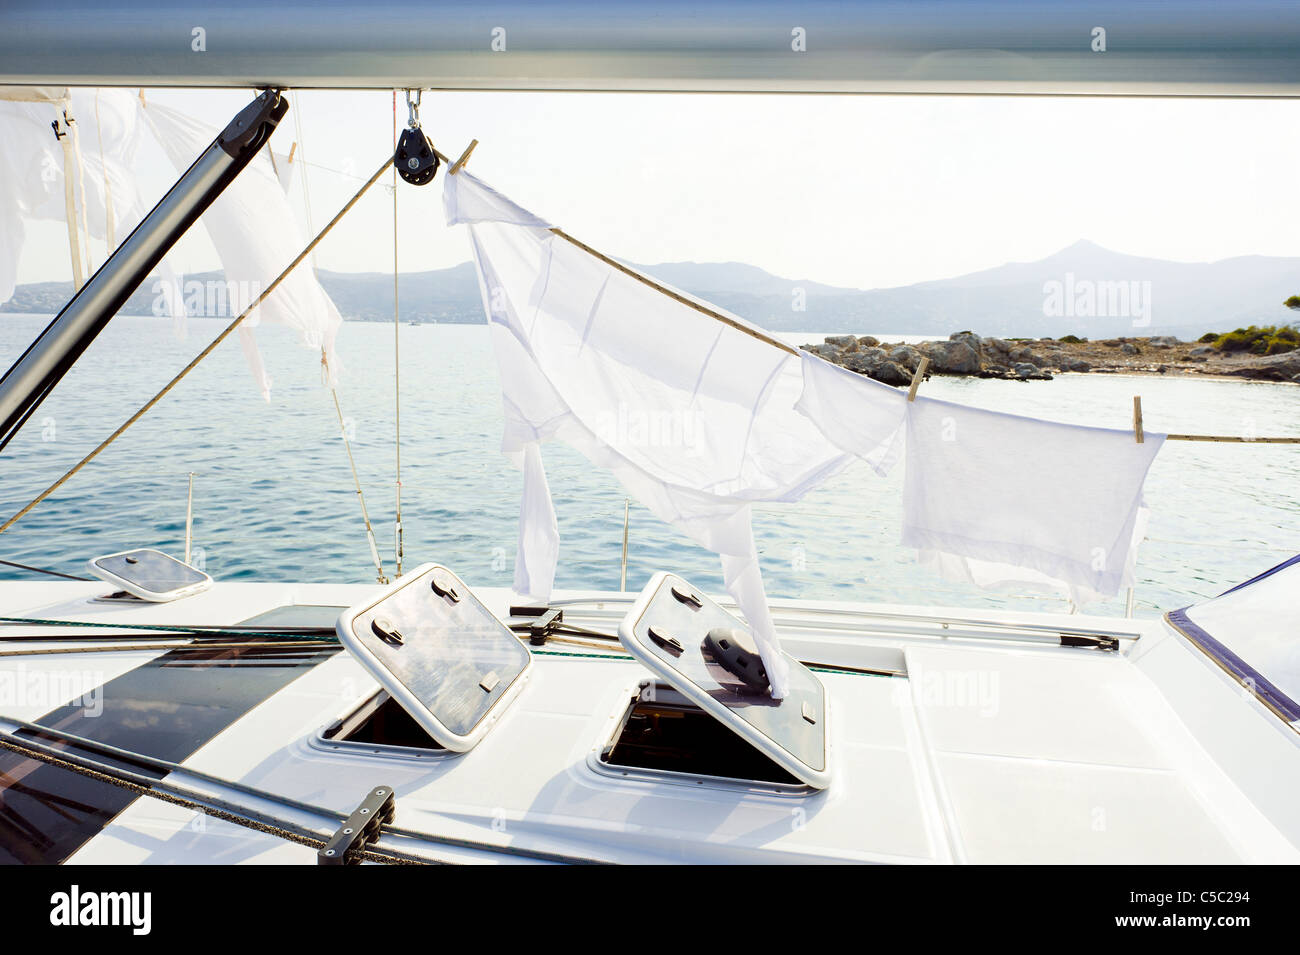 Clothing out to dry on sailboat against sunlight Stock Photo